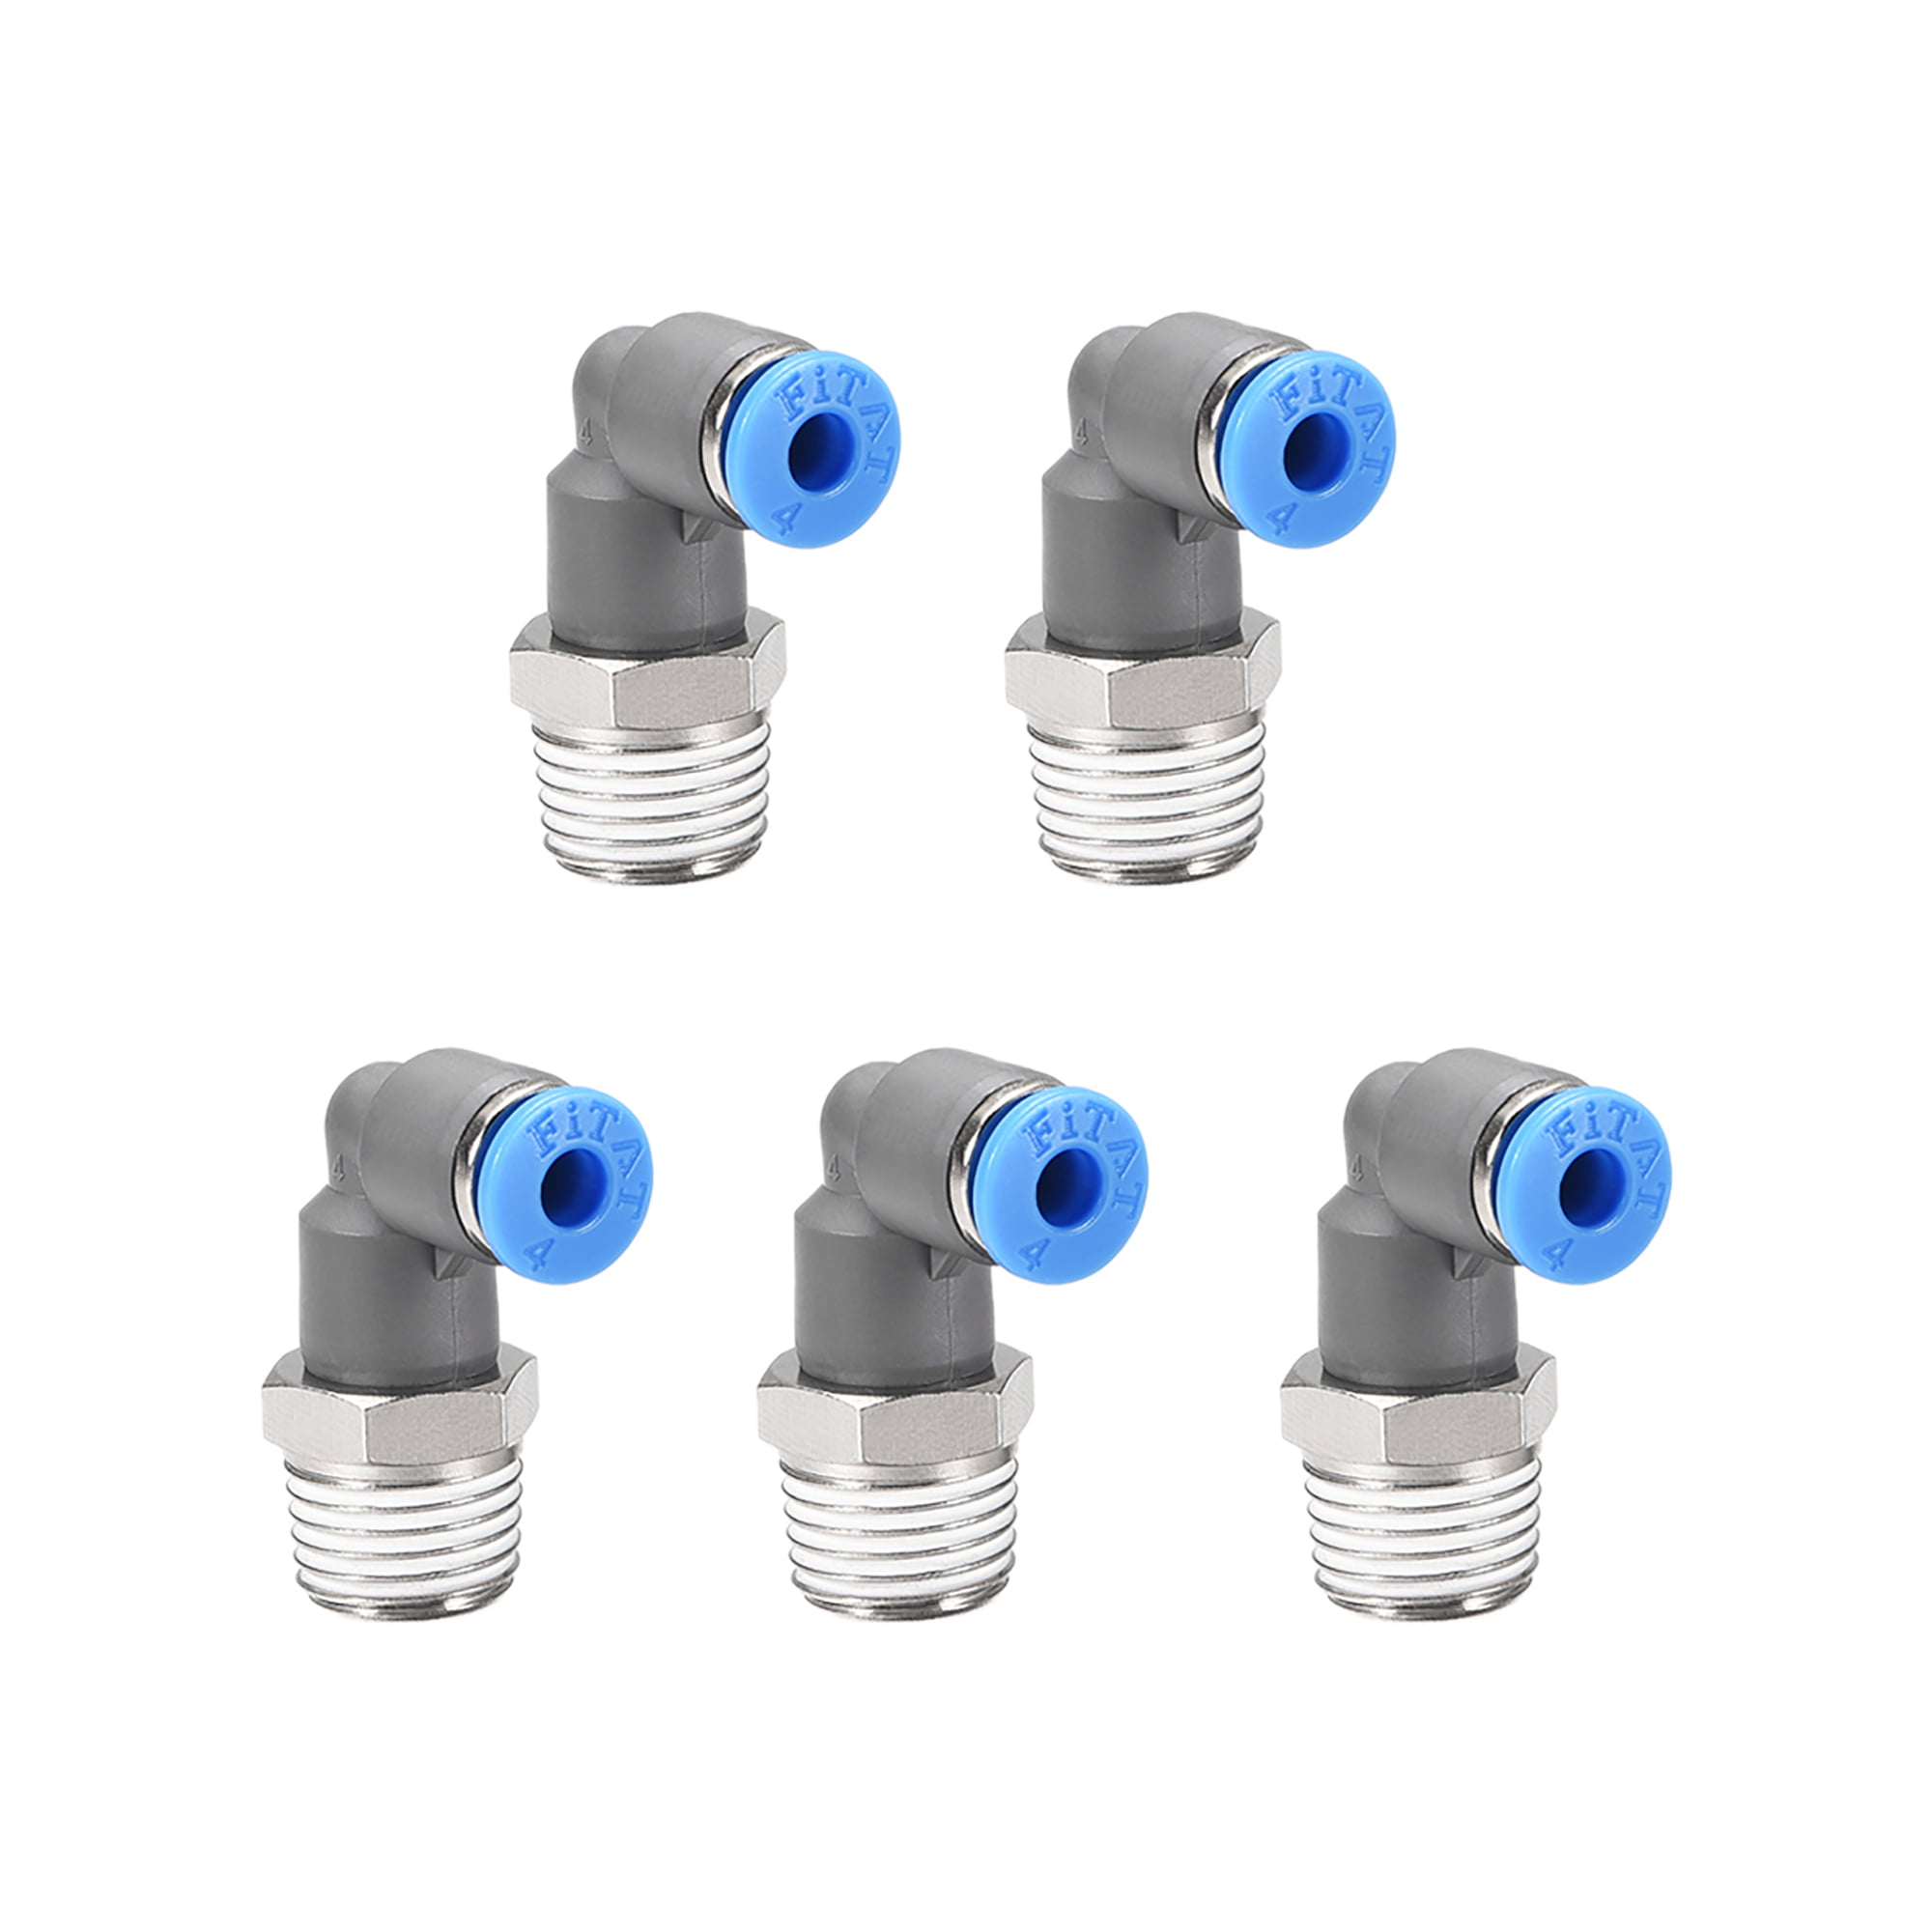 5PCS Pneumatic Push in Connector 1/4" OD Tube x 3/8" Male NPT 90 Degree Elbow 